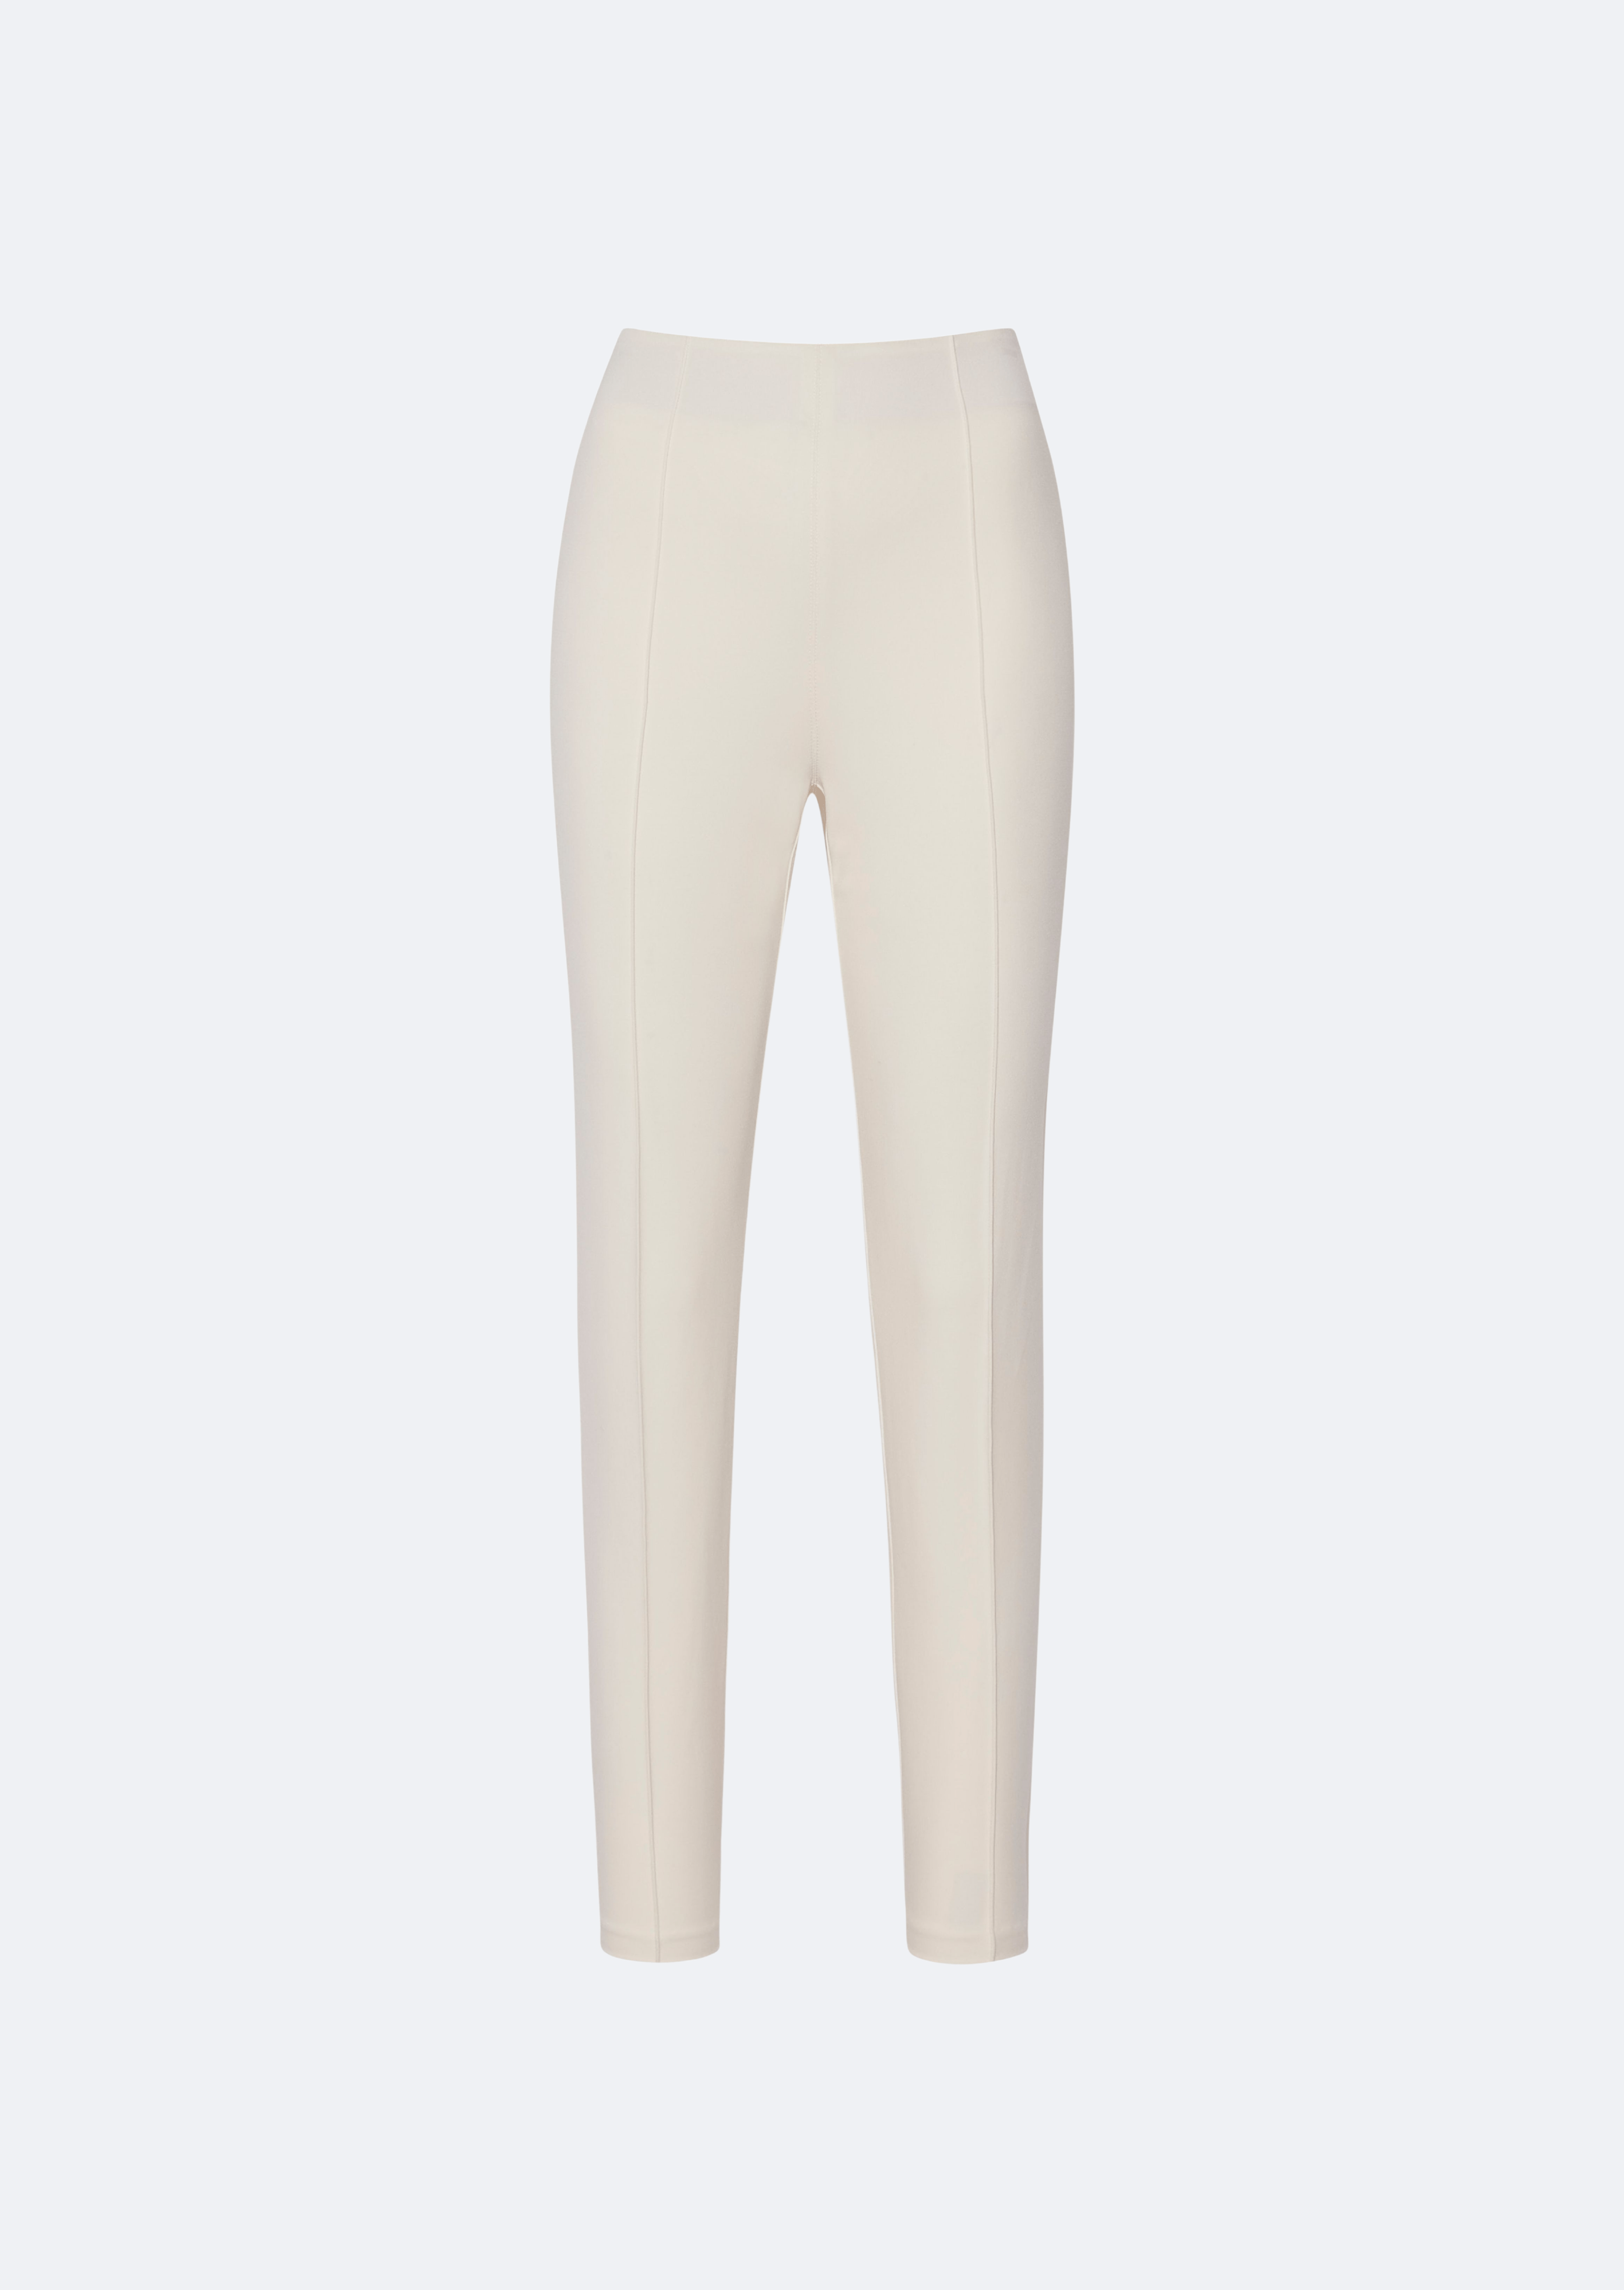 Monki ribbed wide leg cropped trousers in beige | ASOS